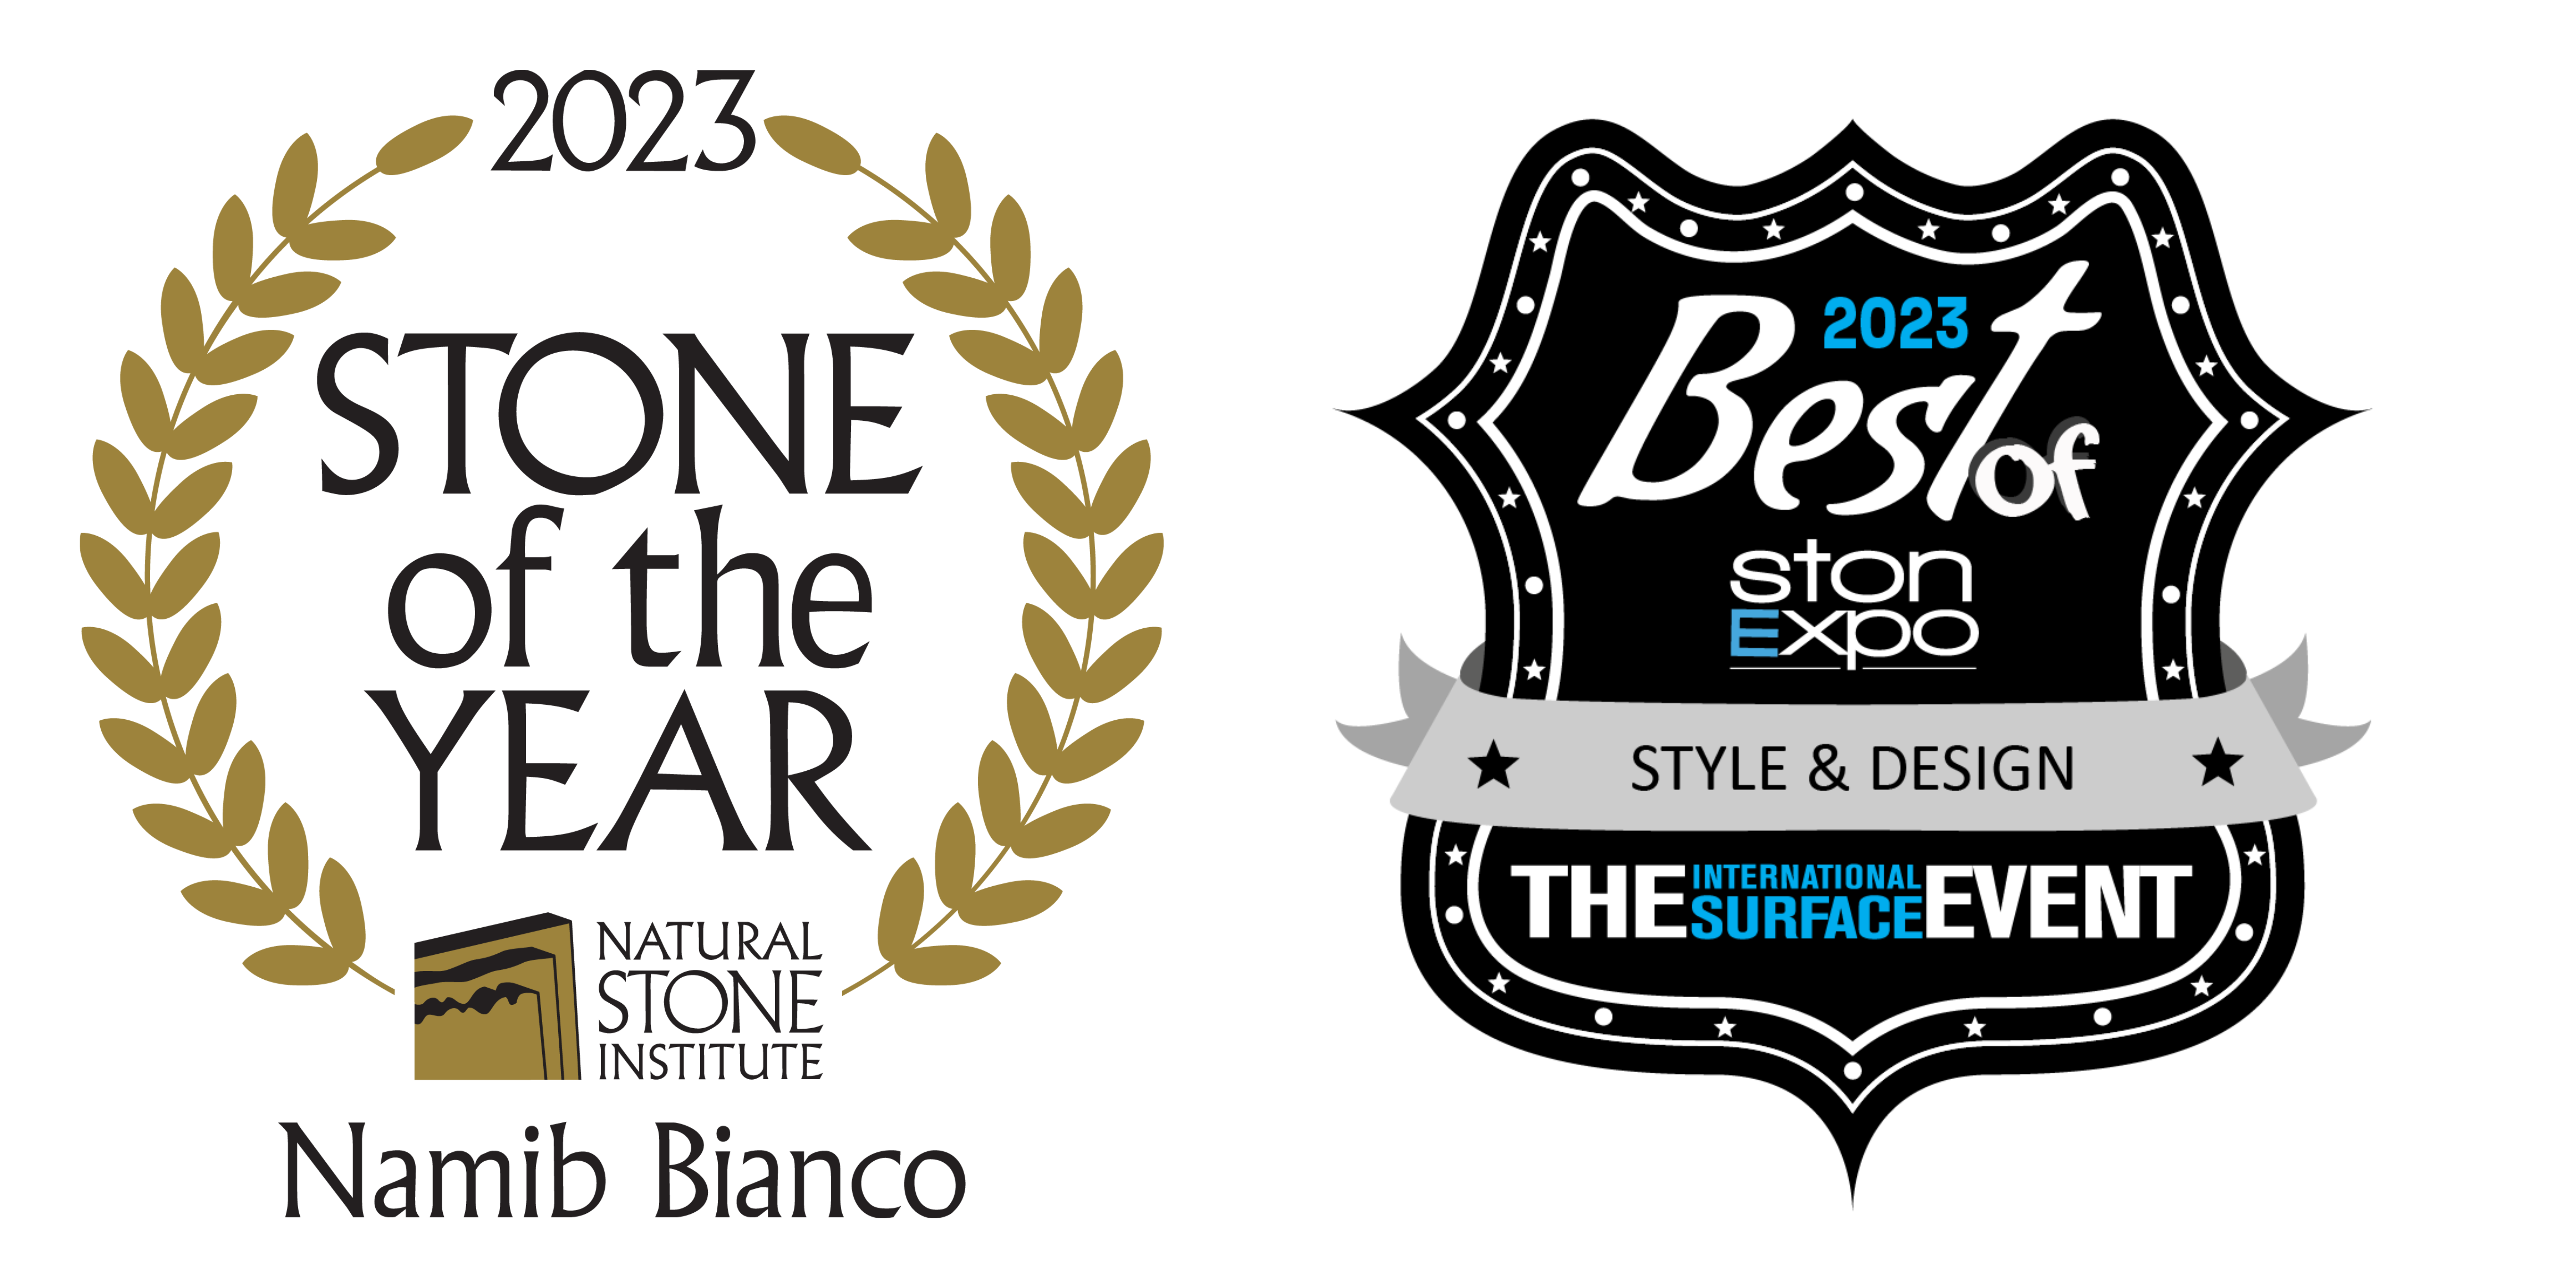 2023 Awards for Stone of the Year from the National Stone Institute and Best of 2023 from The International Surface Event